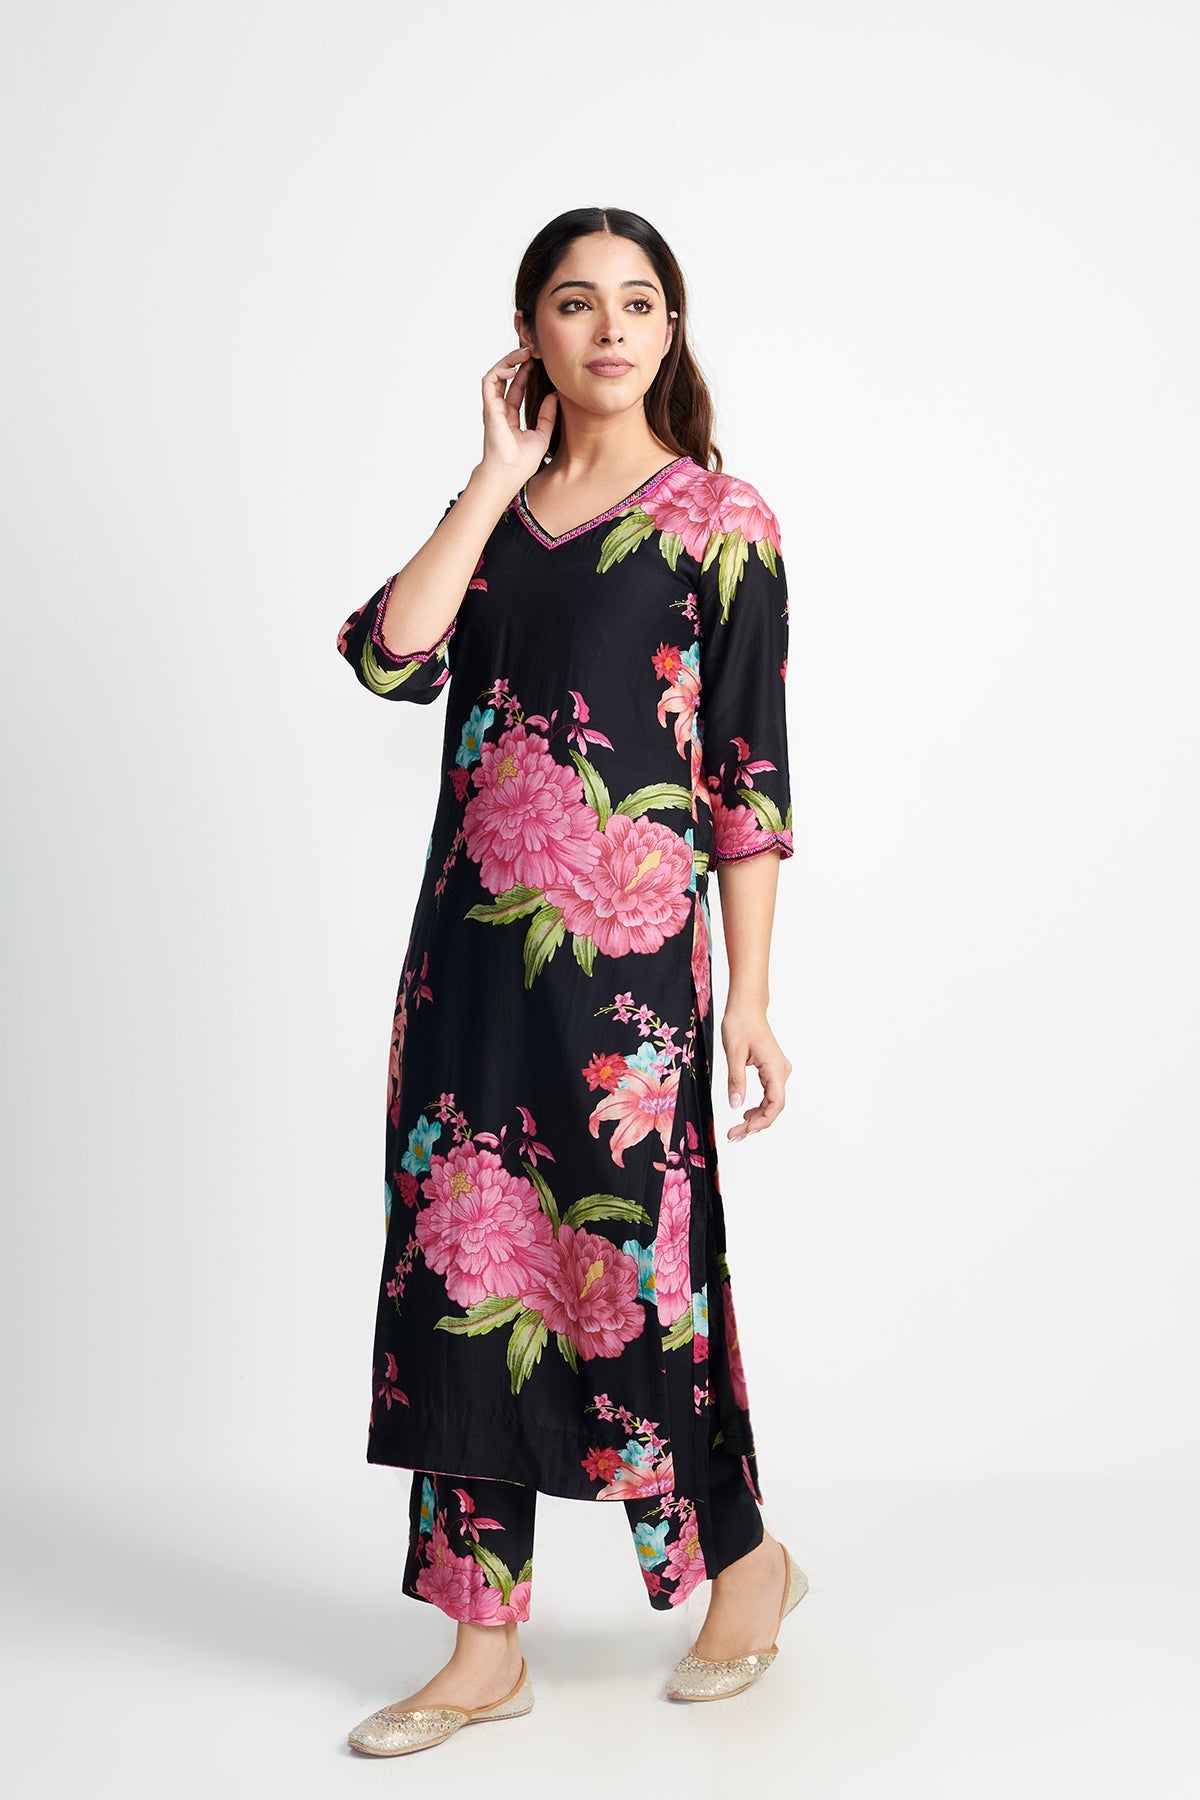 Floral Fiesta Black EMBROIDERED KURTA SET of 3- Sale/ Ready To Ship